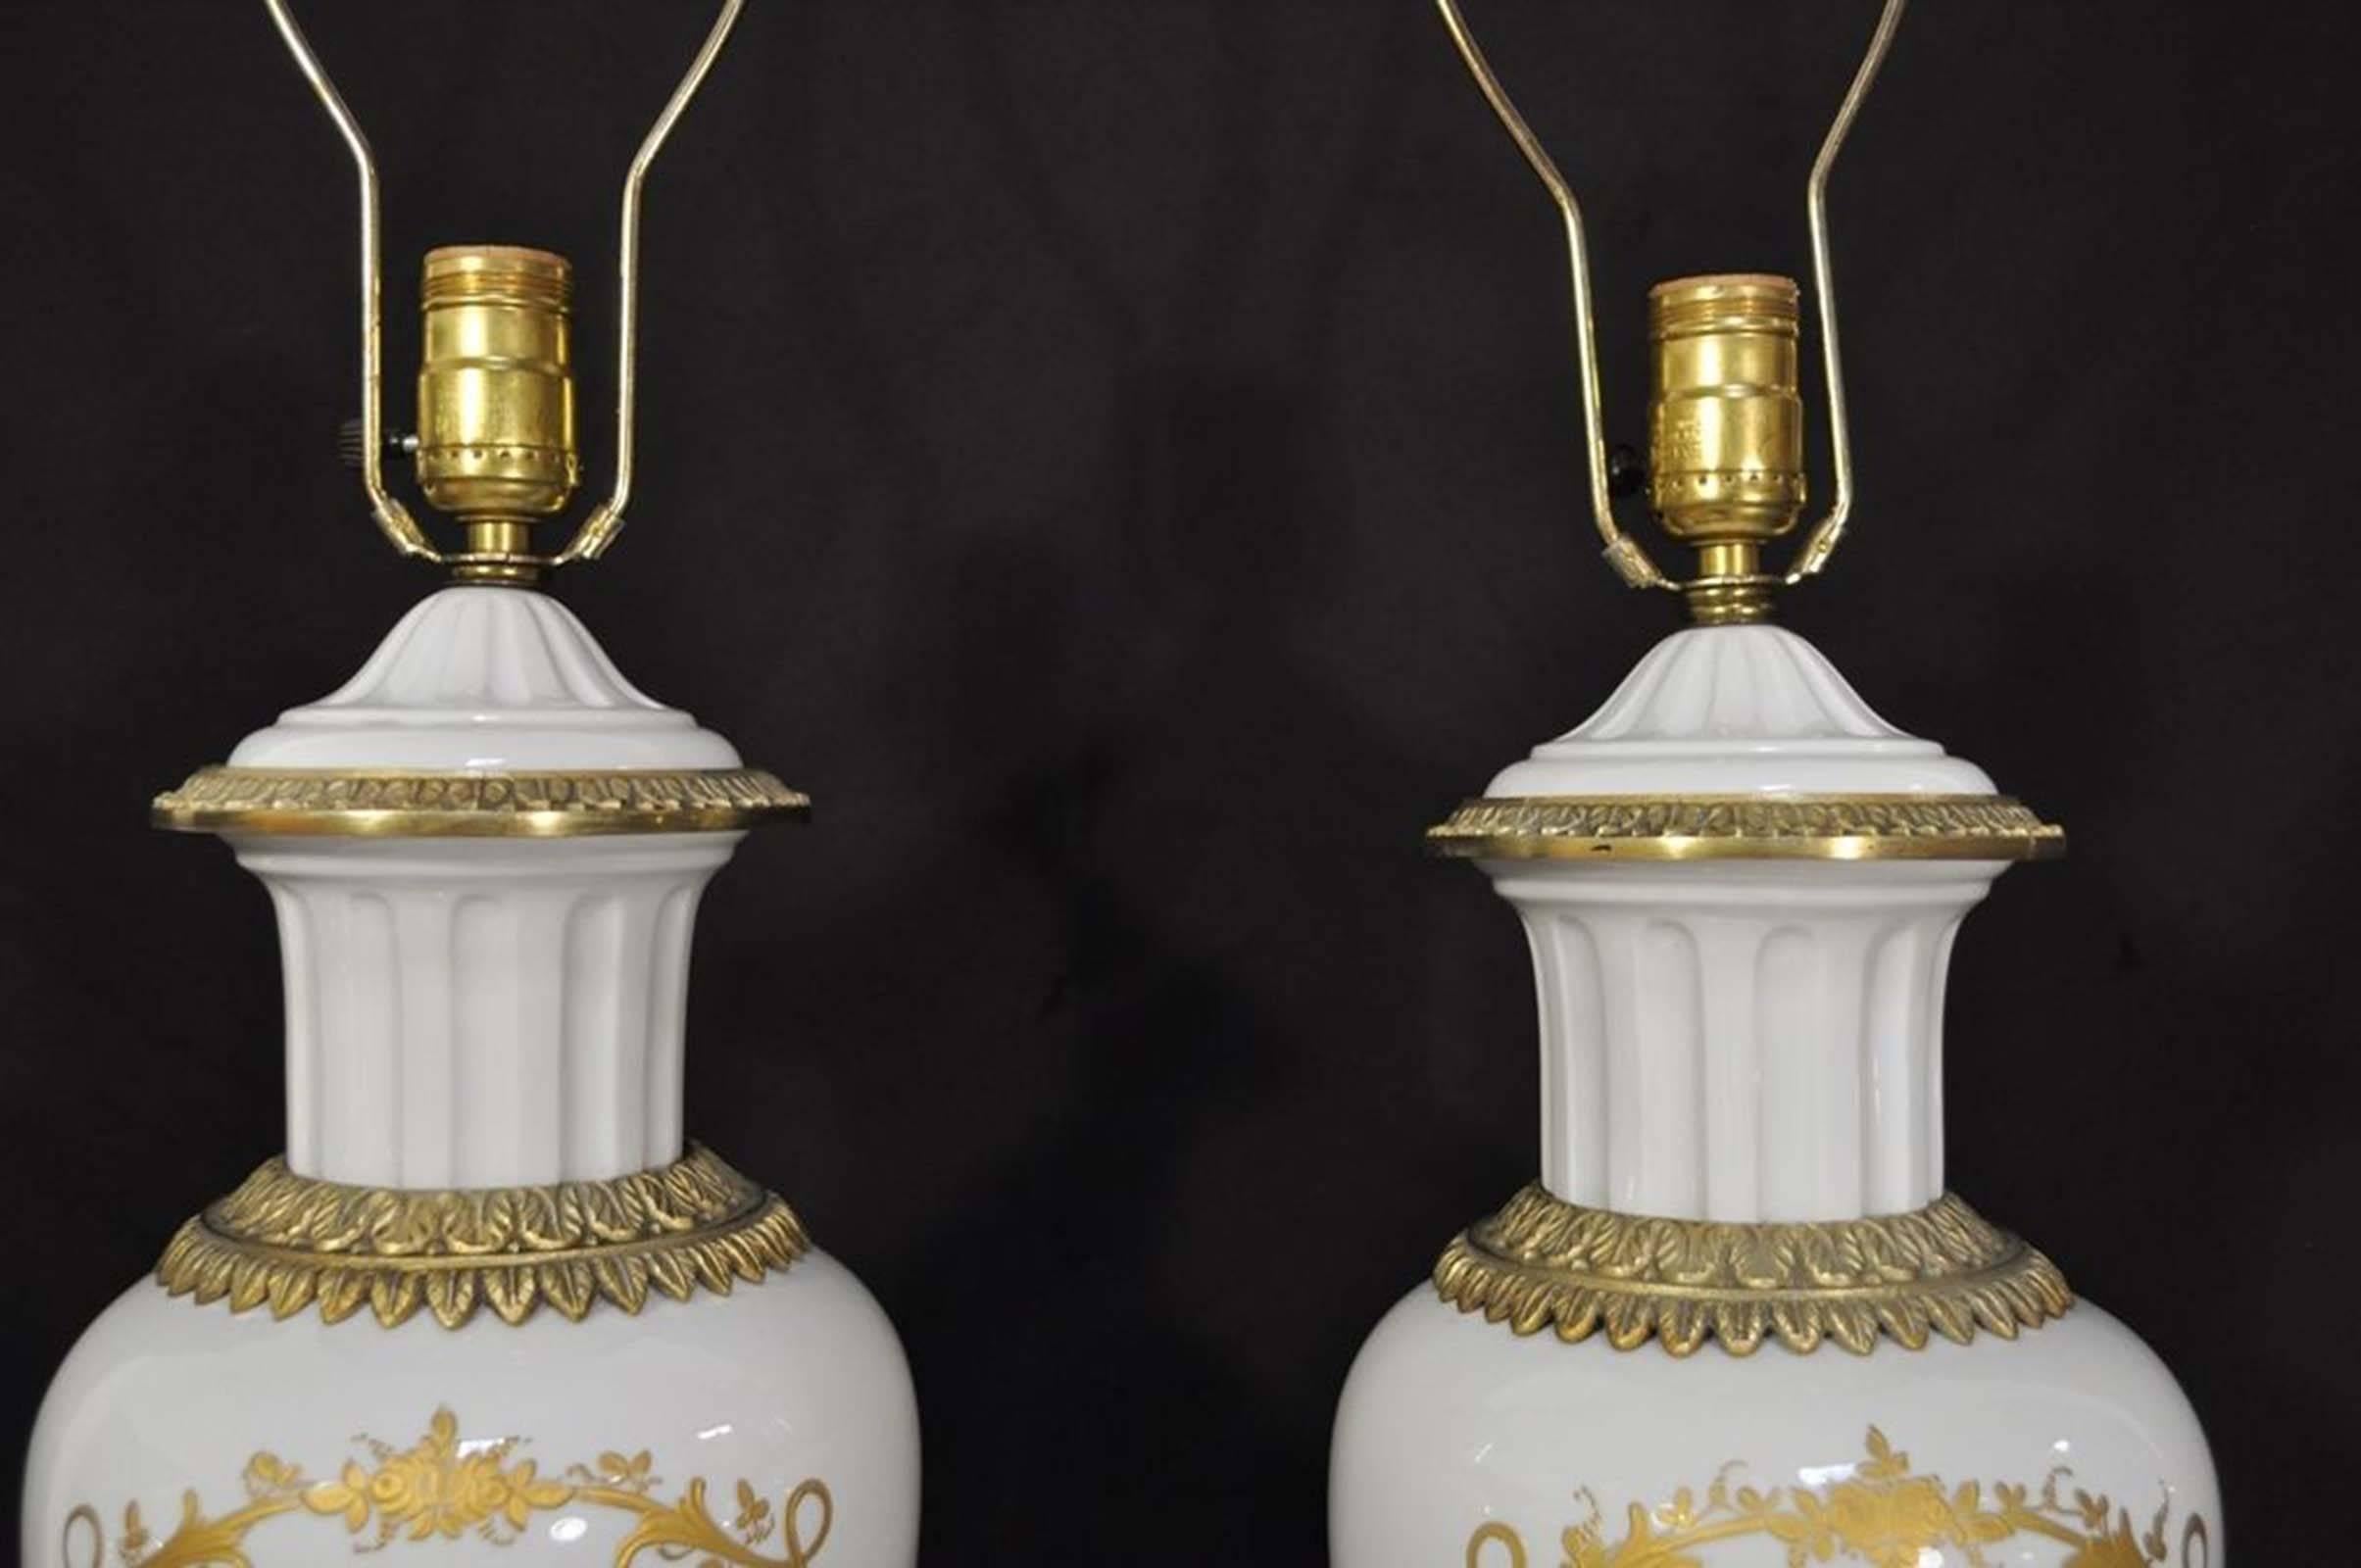 Pair of Sèvres French Hand-Painted Porcelain Urn Form Table Lamps White & Gold 1